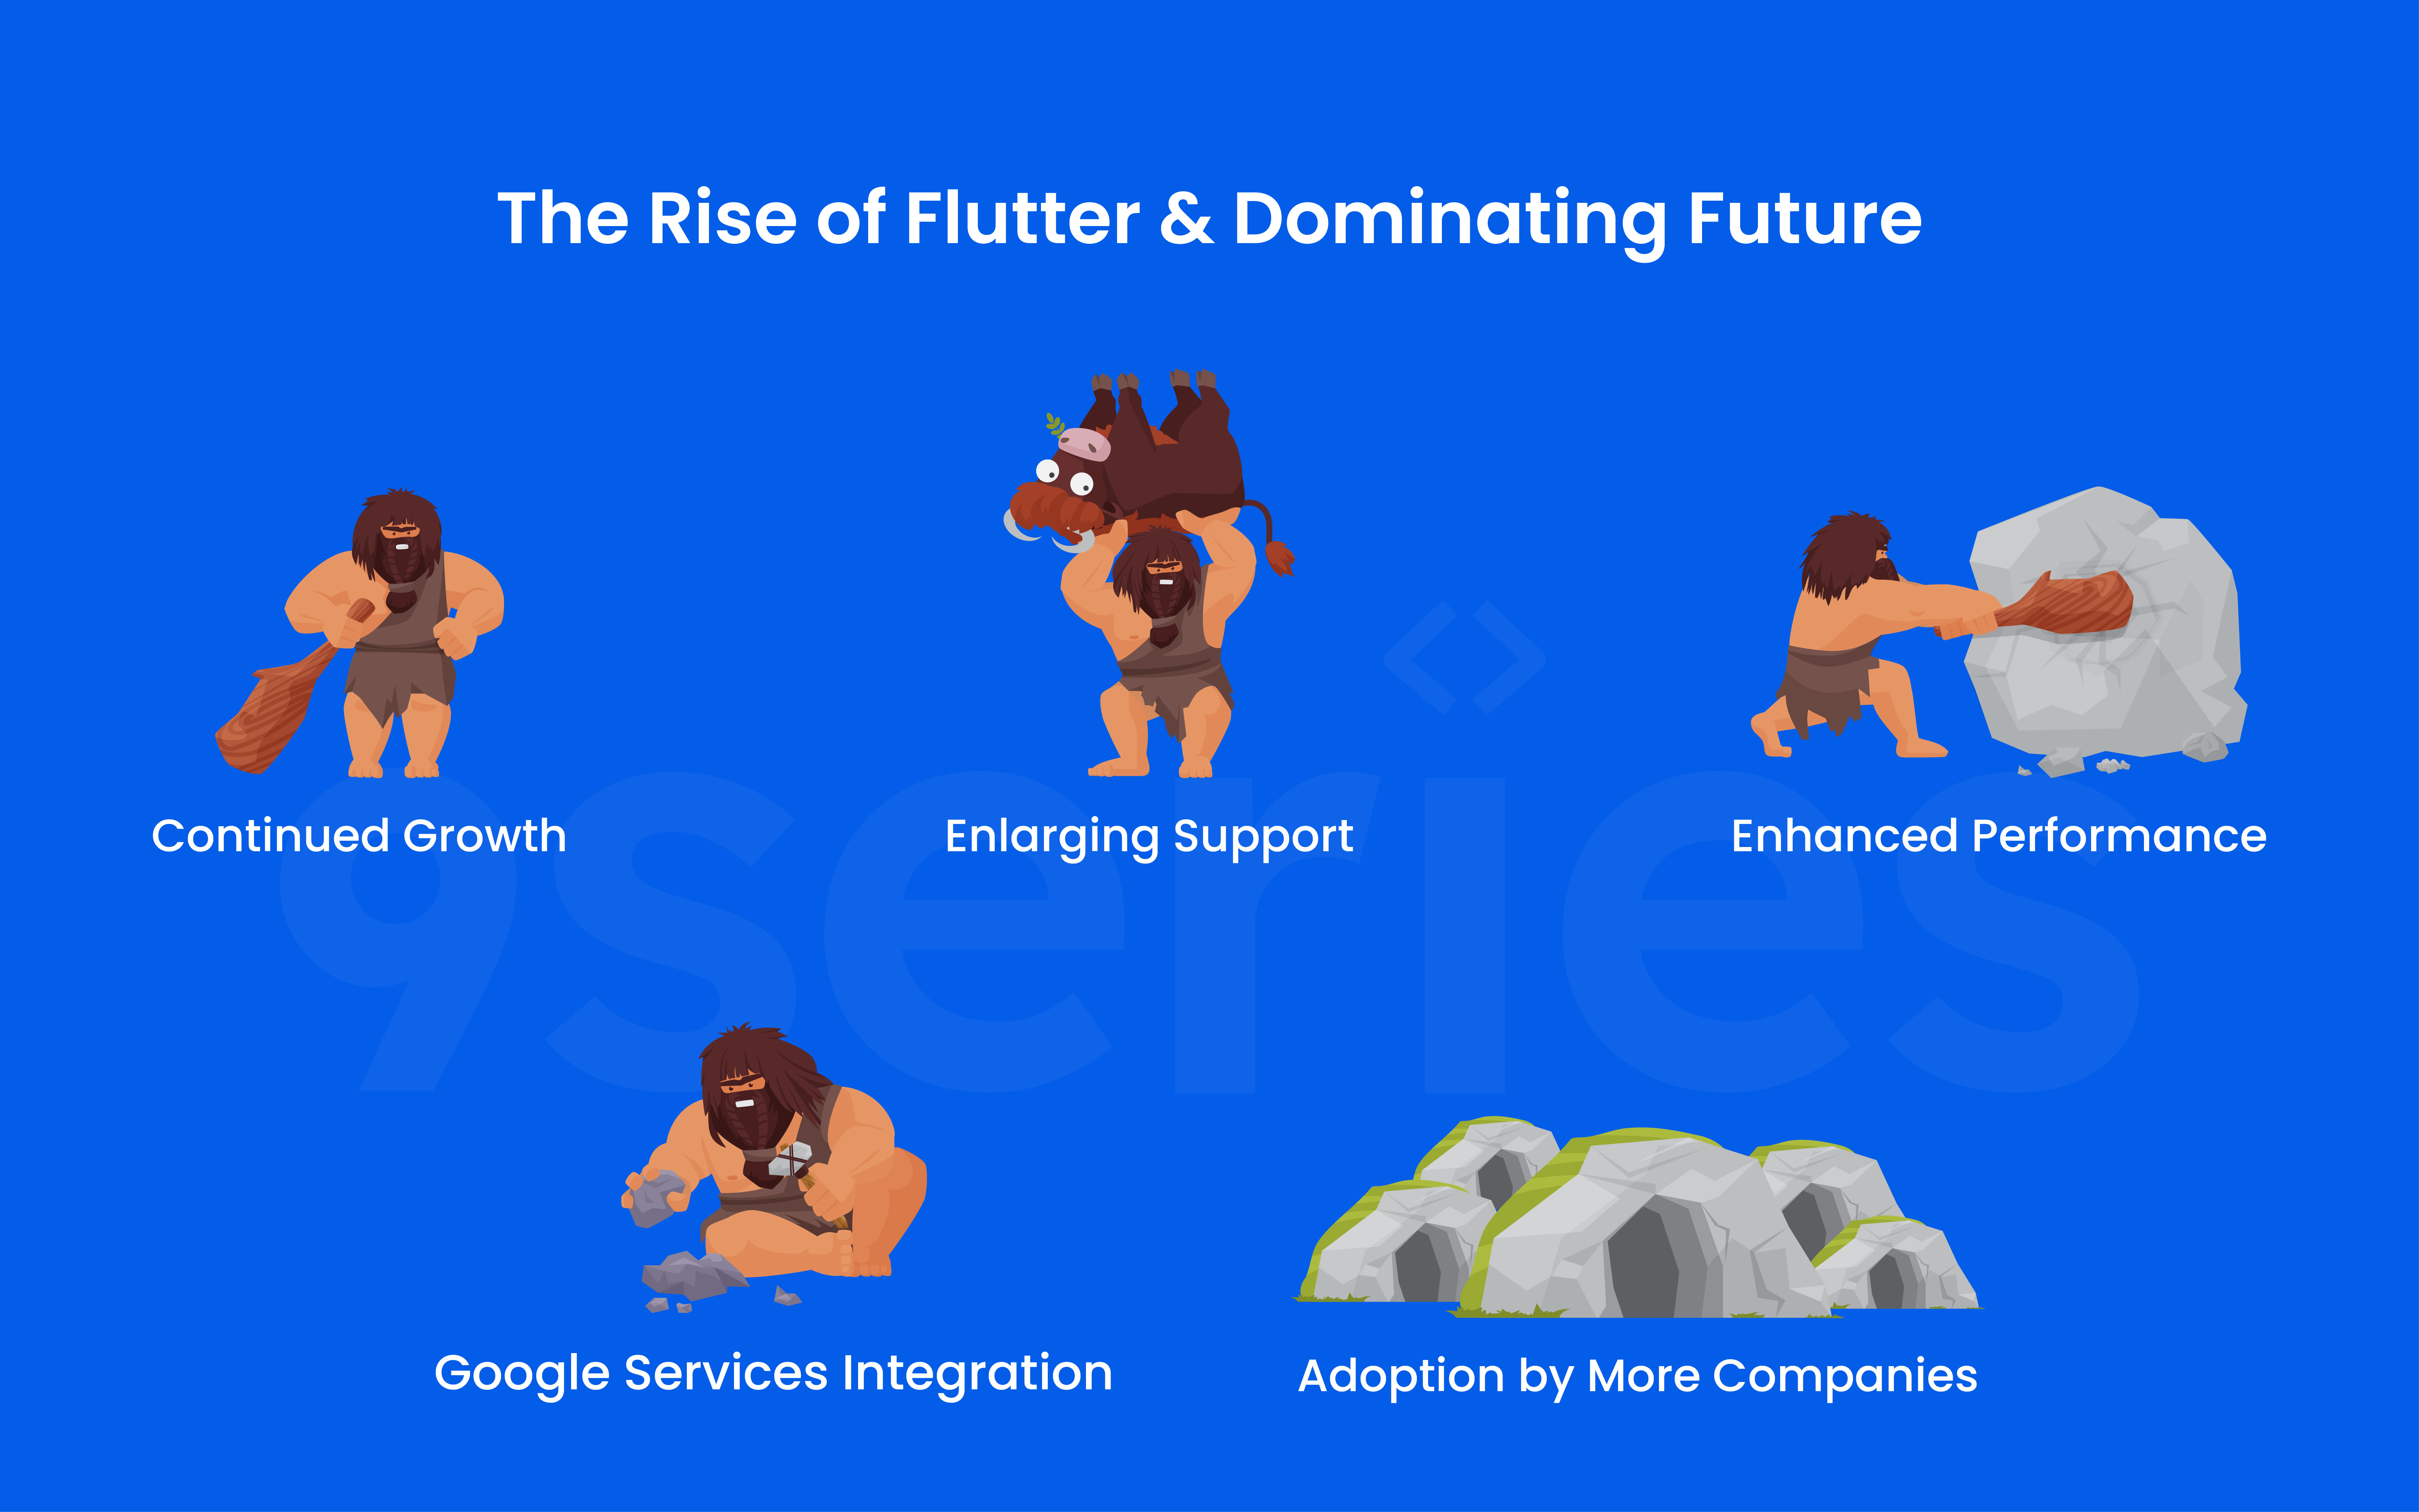 The Rise of Flutter & Dominating Future